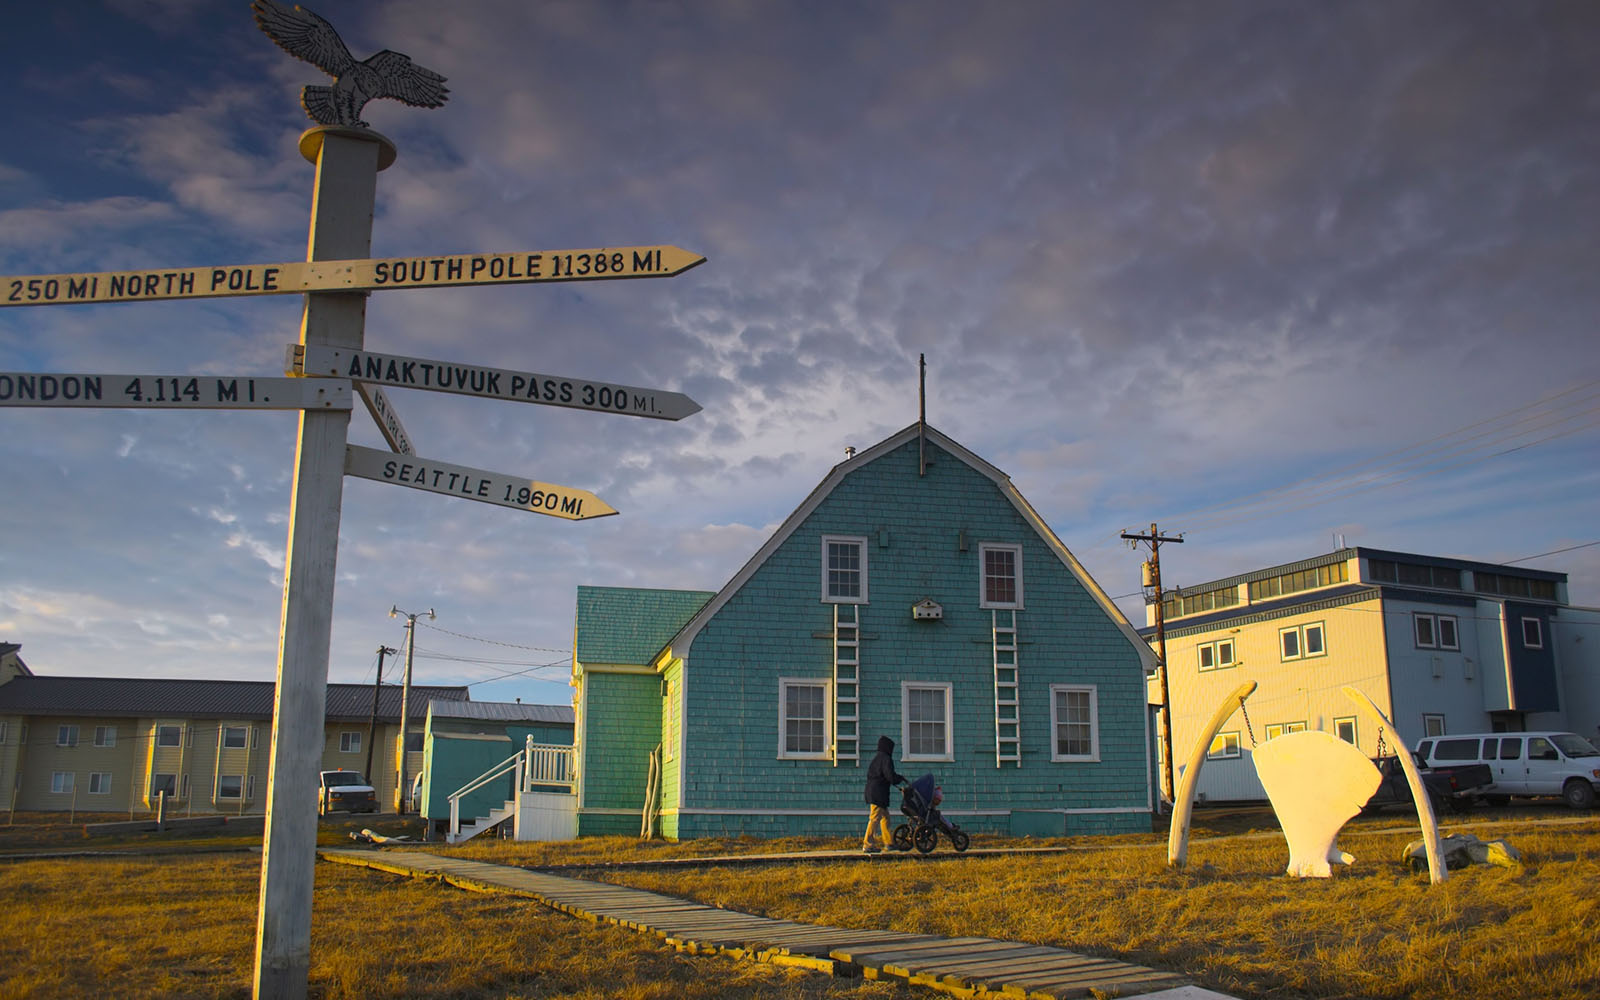 Photo of houses in Barrow, Alaska and a signpost pointing to far-away places